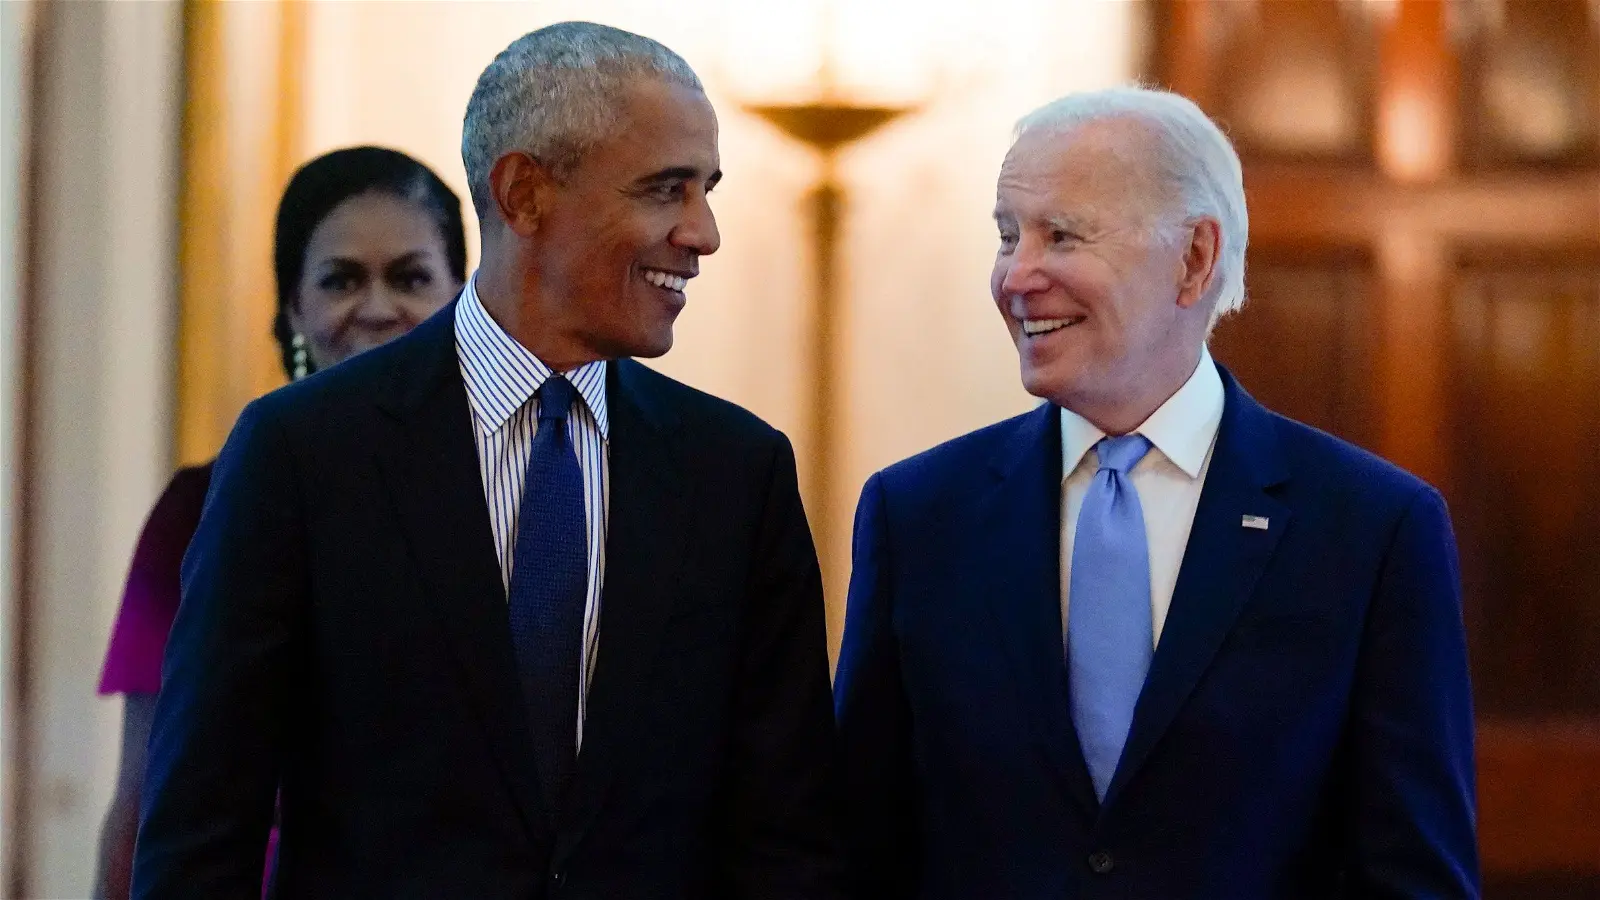 Mixed Reactions As Obama Roots For Biden After Bad Presidential Debate Night